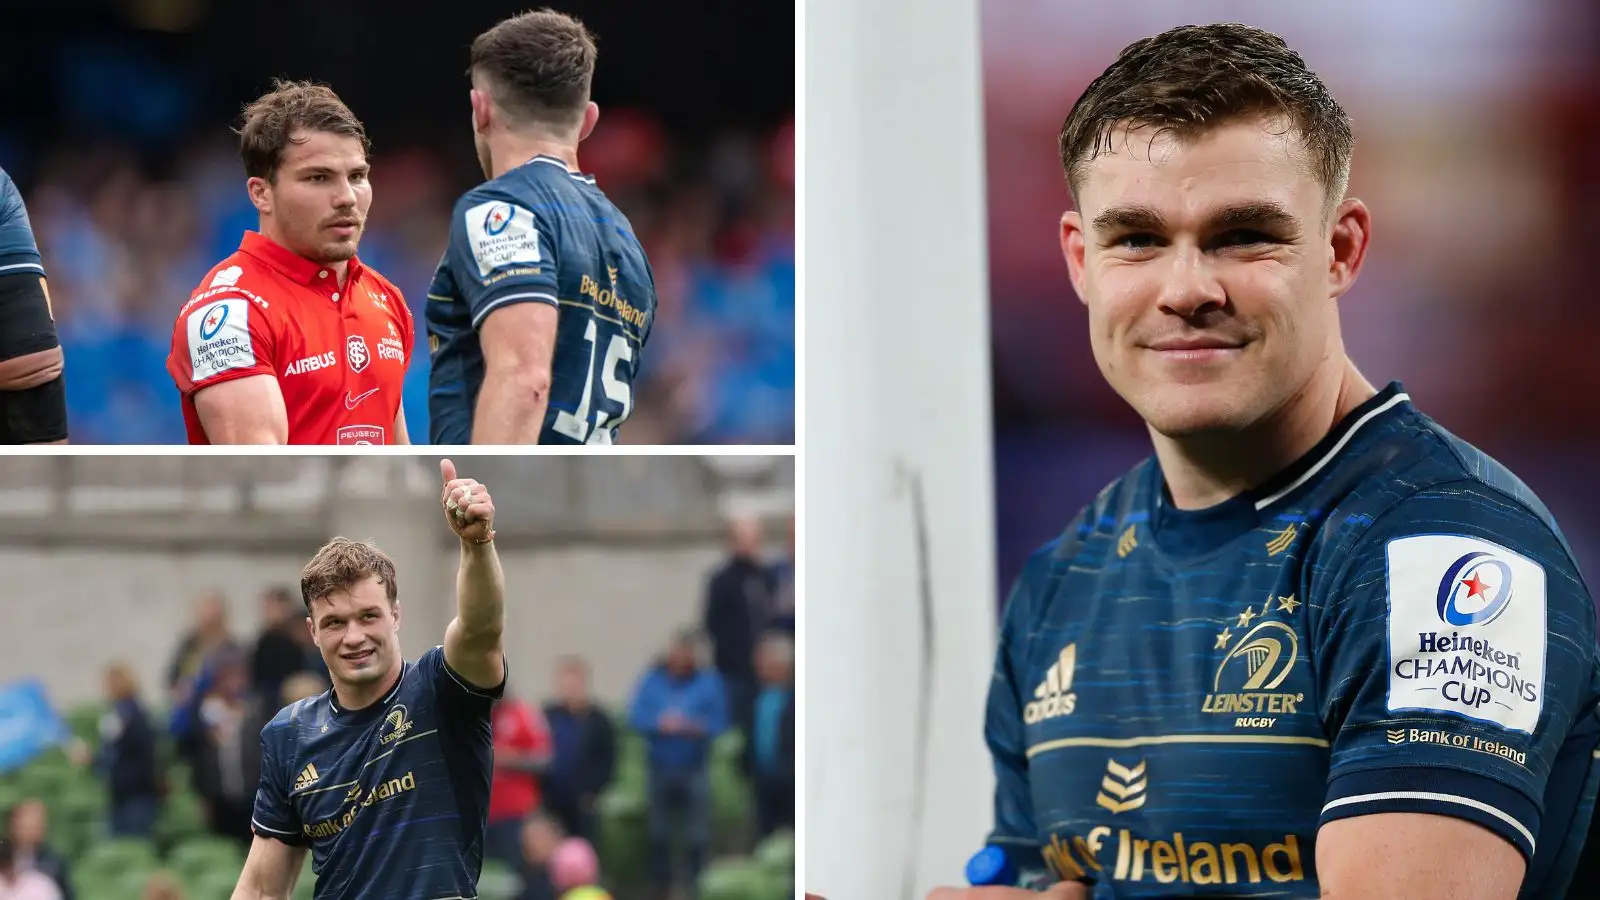 Champions Cup EPCR Player of the Year has been confirmed and includes three Leinster players and one from La Rochelle and Toulouse